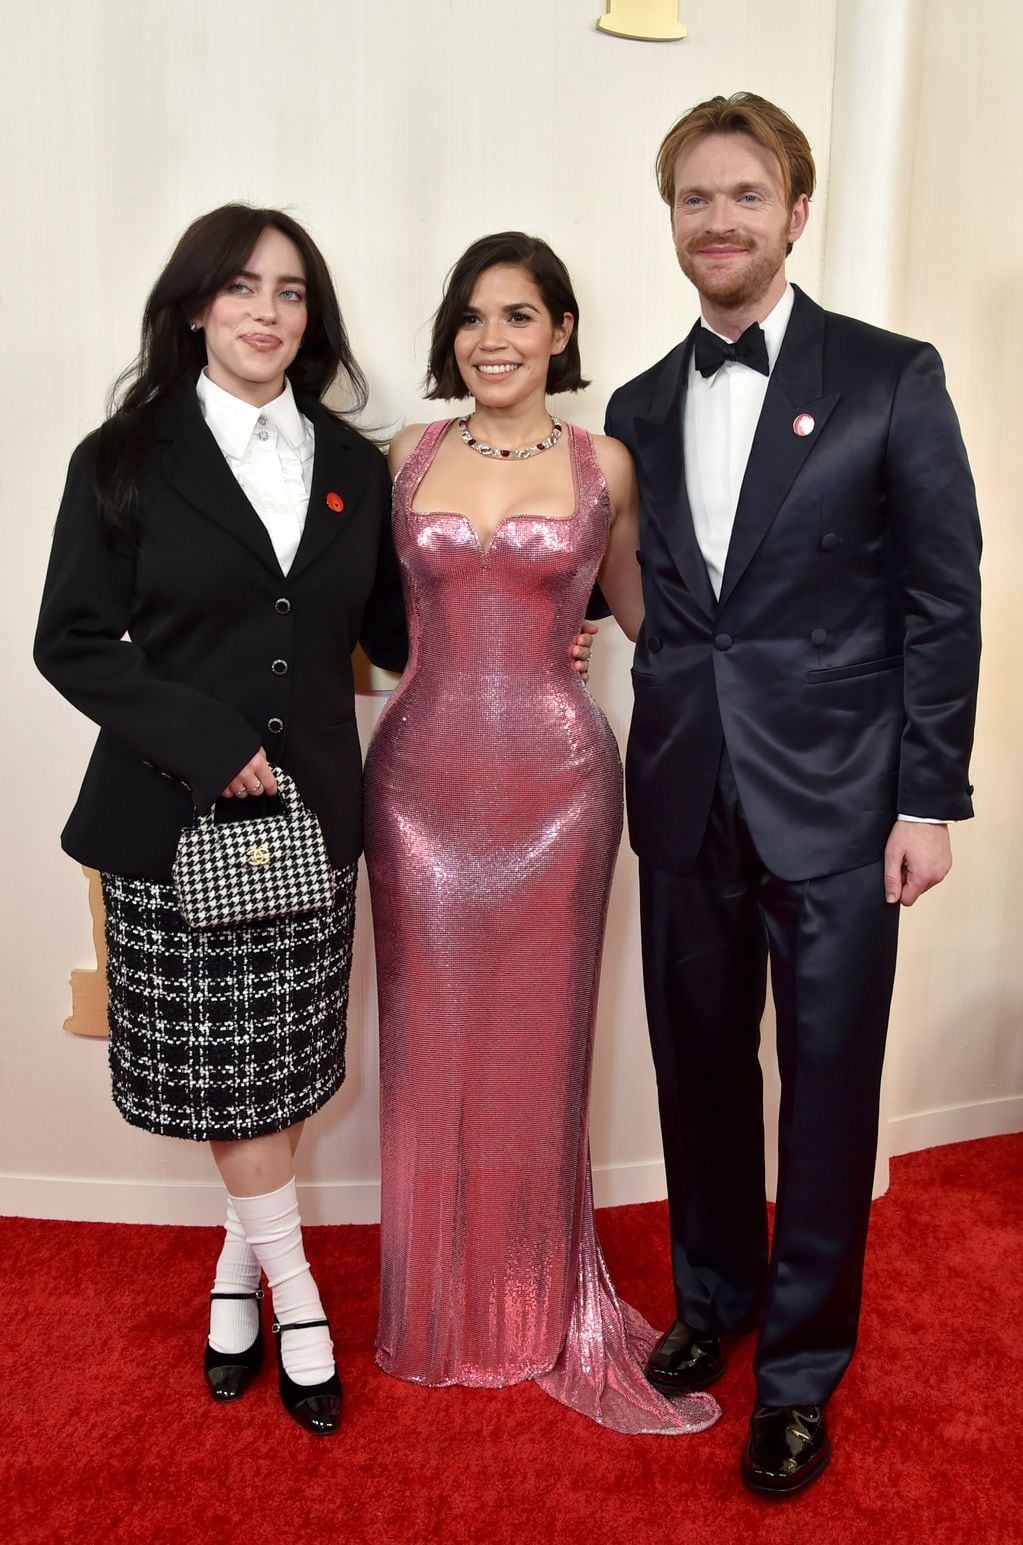 Billie Eilish, from left, America Ferrera and Finneas O'Connell arrive at the Oscars on Sunday, March 10, 2024, at the Dolby Theatre in Los Angeles. (Photo by Richard Shotwell/Invision/AP)